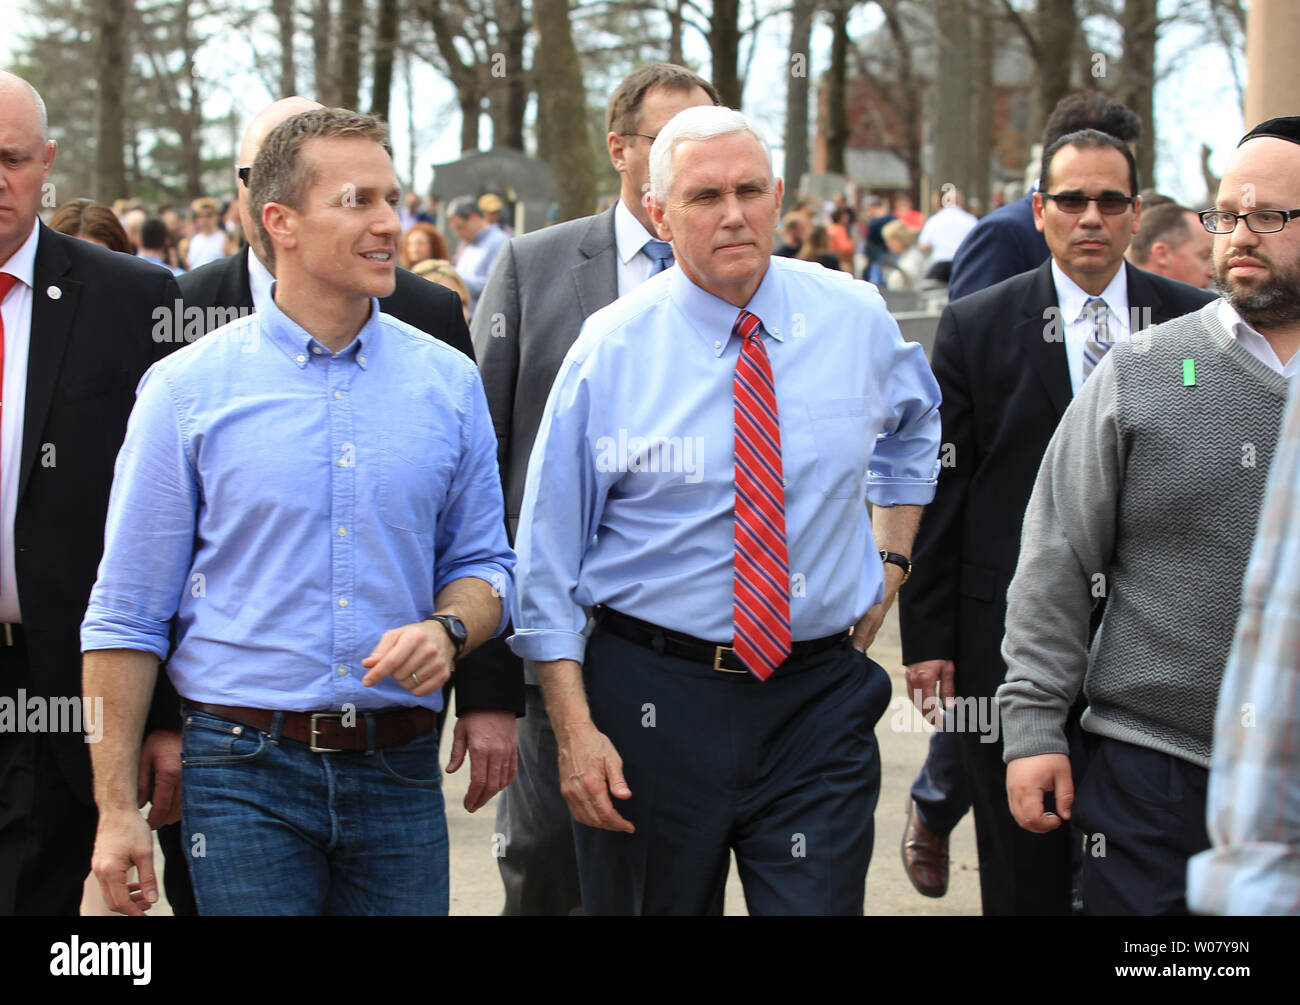 Vice President Mike Pence walks with Missouri Governor Eric Greitens to clean up leaves and branches in the Chesed Shel Emeth Cemetery in University City on February 22, 2017. Vandals toppled nearly 200 headstones on February 20, 2017 in the Jewish cemetery. Pence who was in town for another event had asked to go to the cemetery for the large community cleanup that attracted over four thousand people.  Photo by Bill Greenblatt/UPI Stock Photo